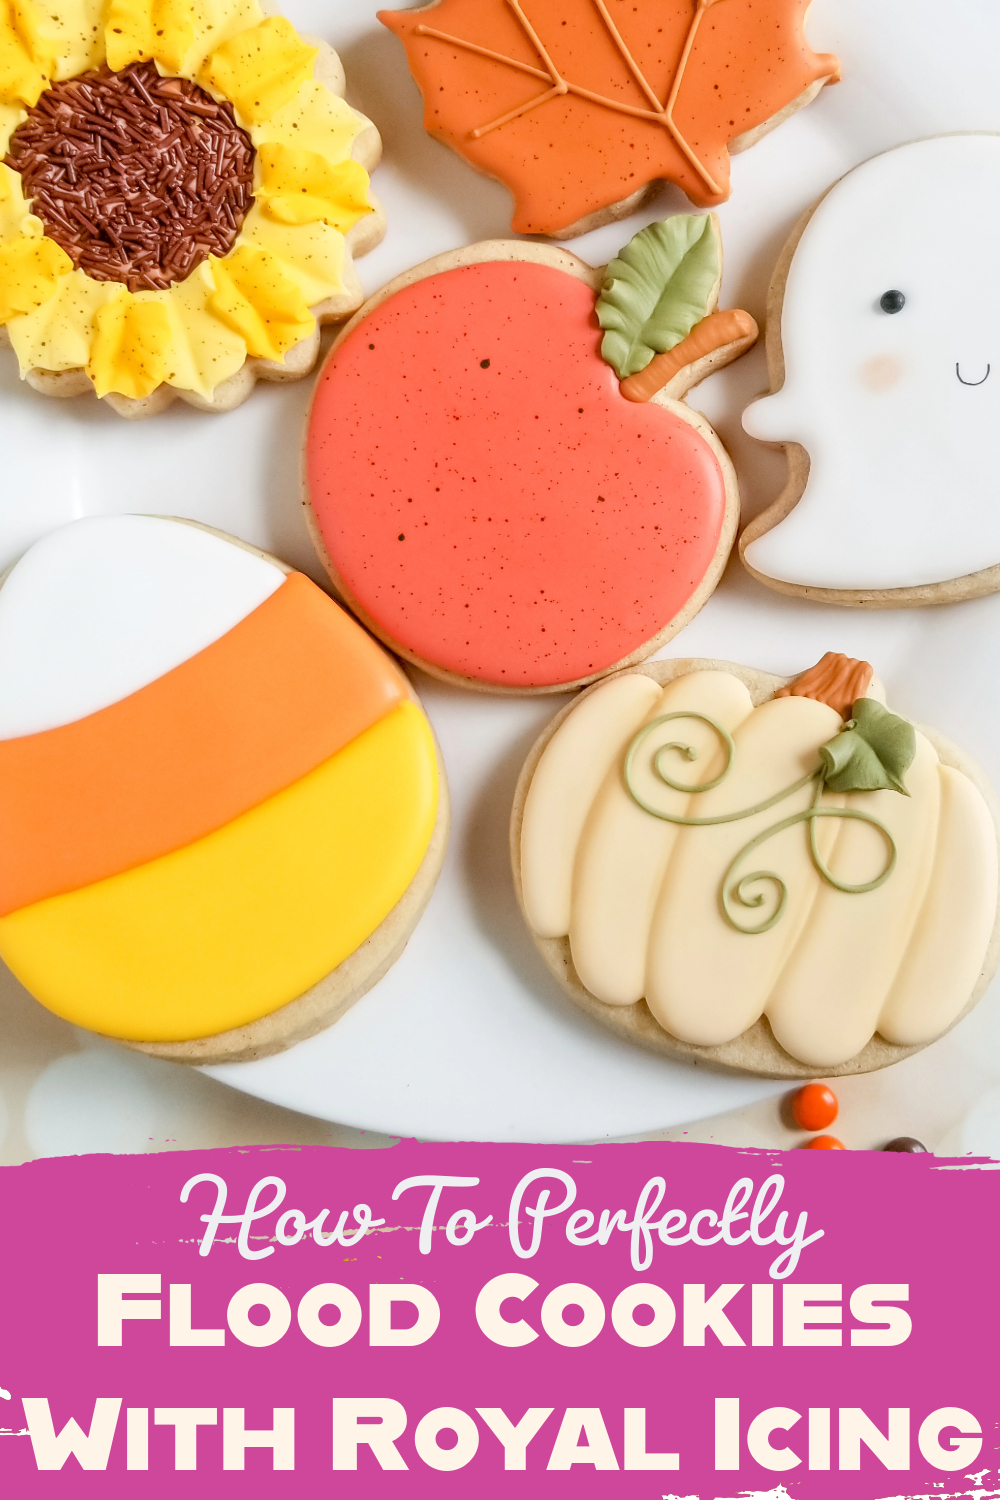 How To Perfectly Flood Cookies With Royal Icing